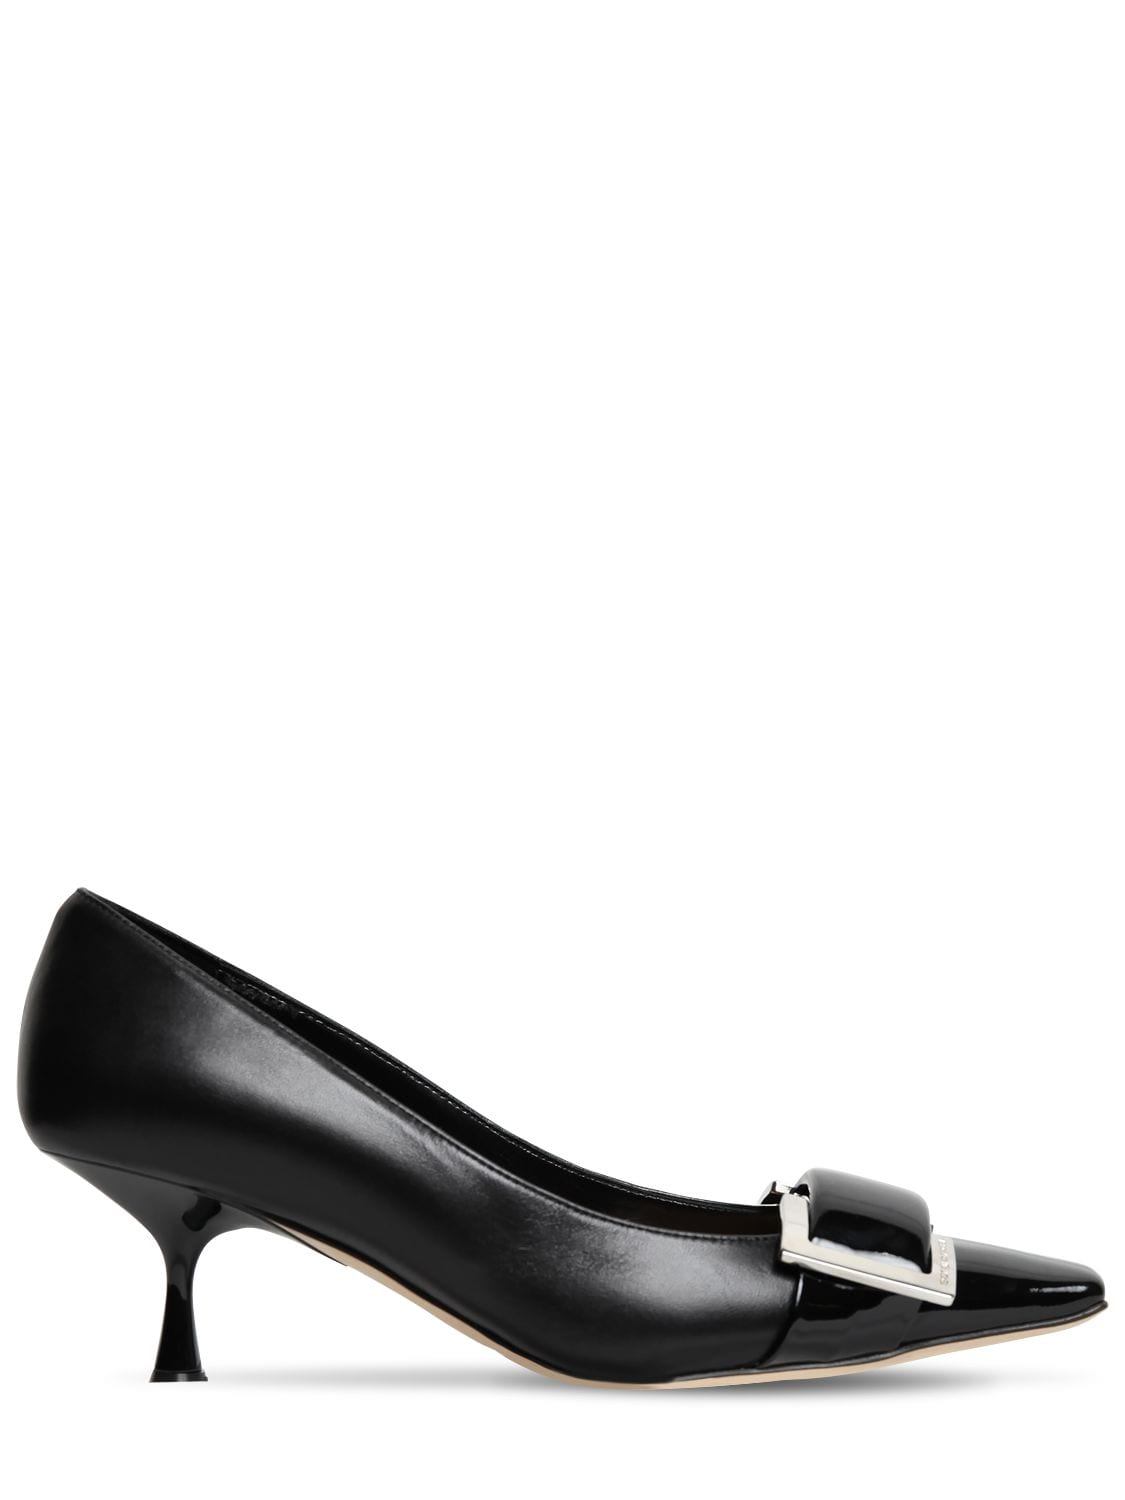 Sergio Rossi 60mm Archive Leather Pumps In Black